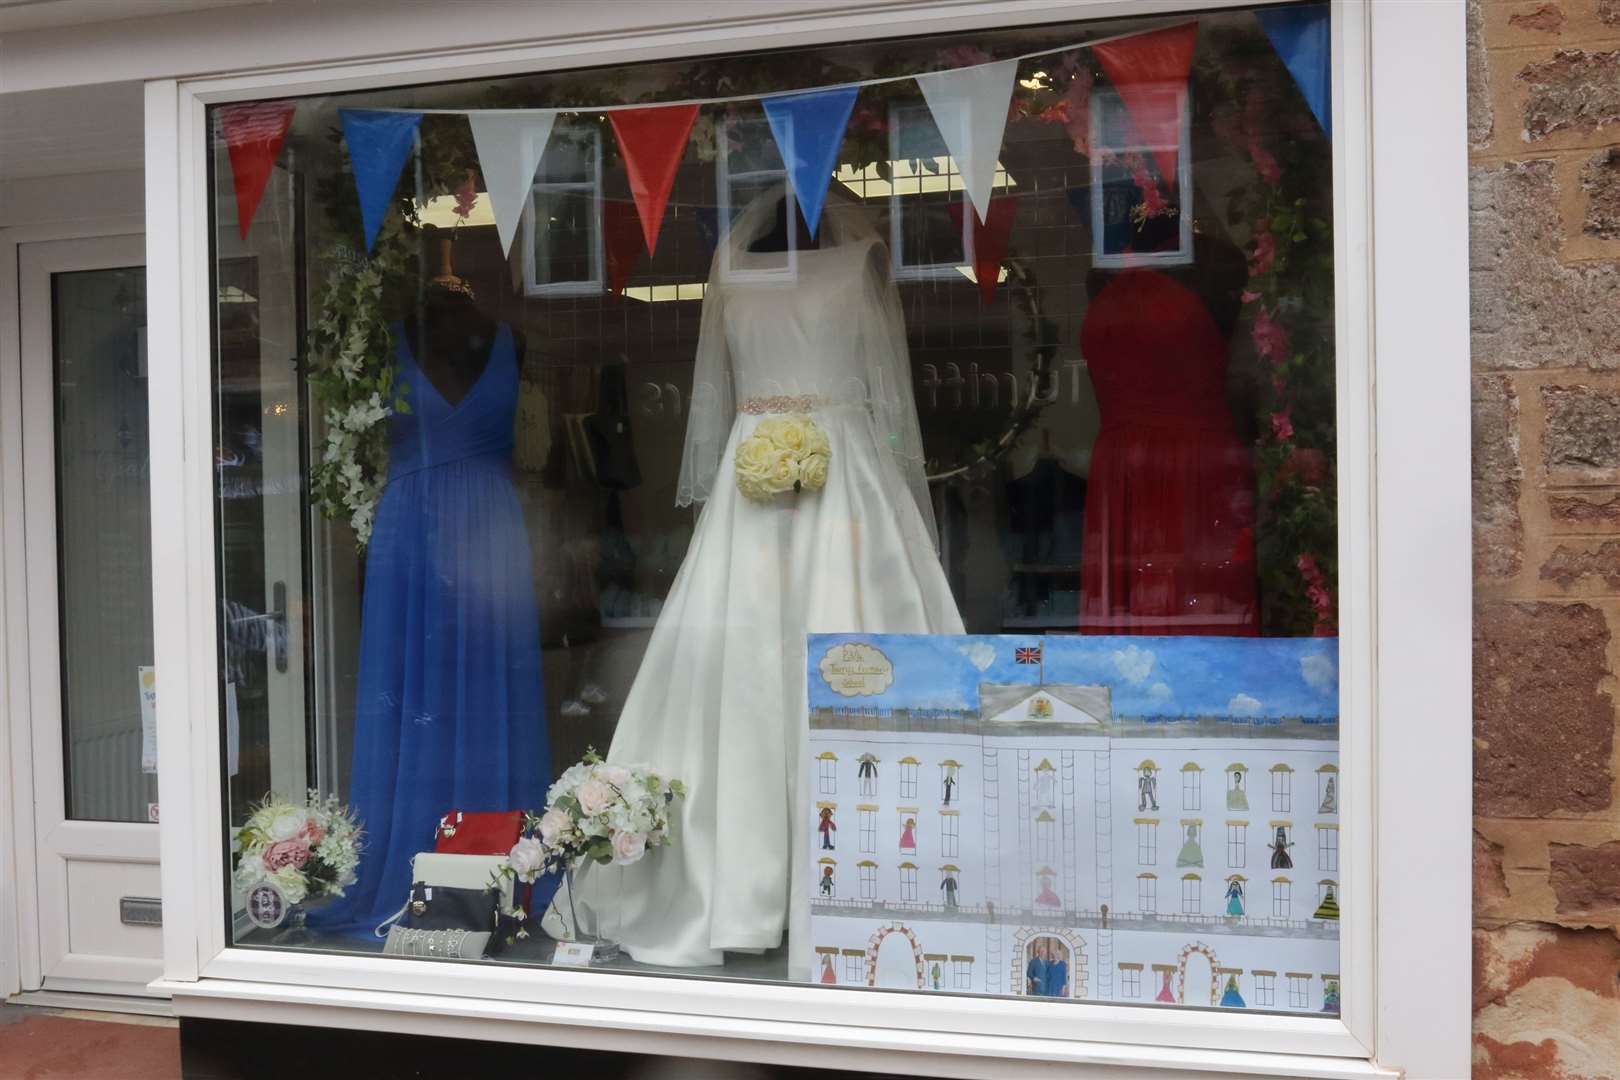 Shops including those in Turriff have taken on a coronation theme